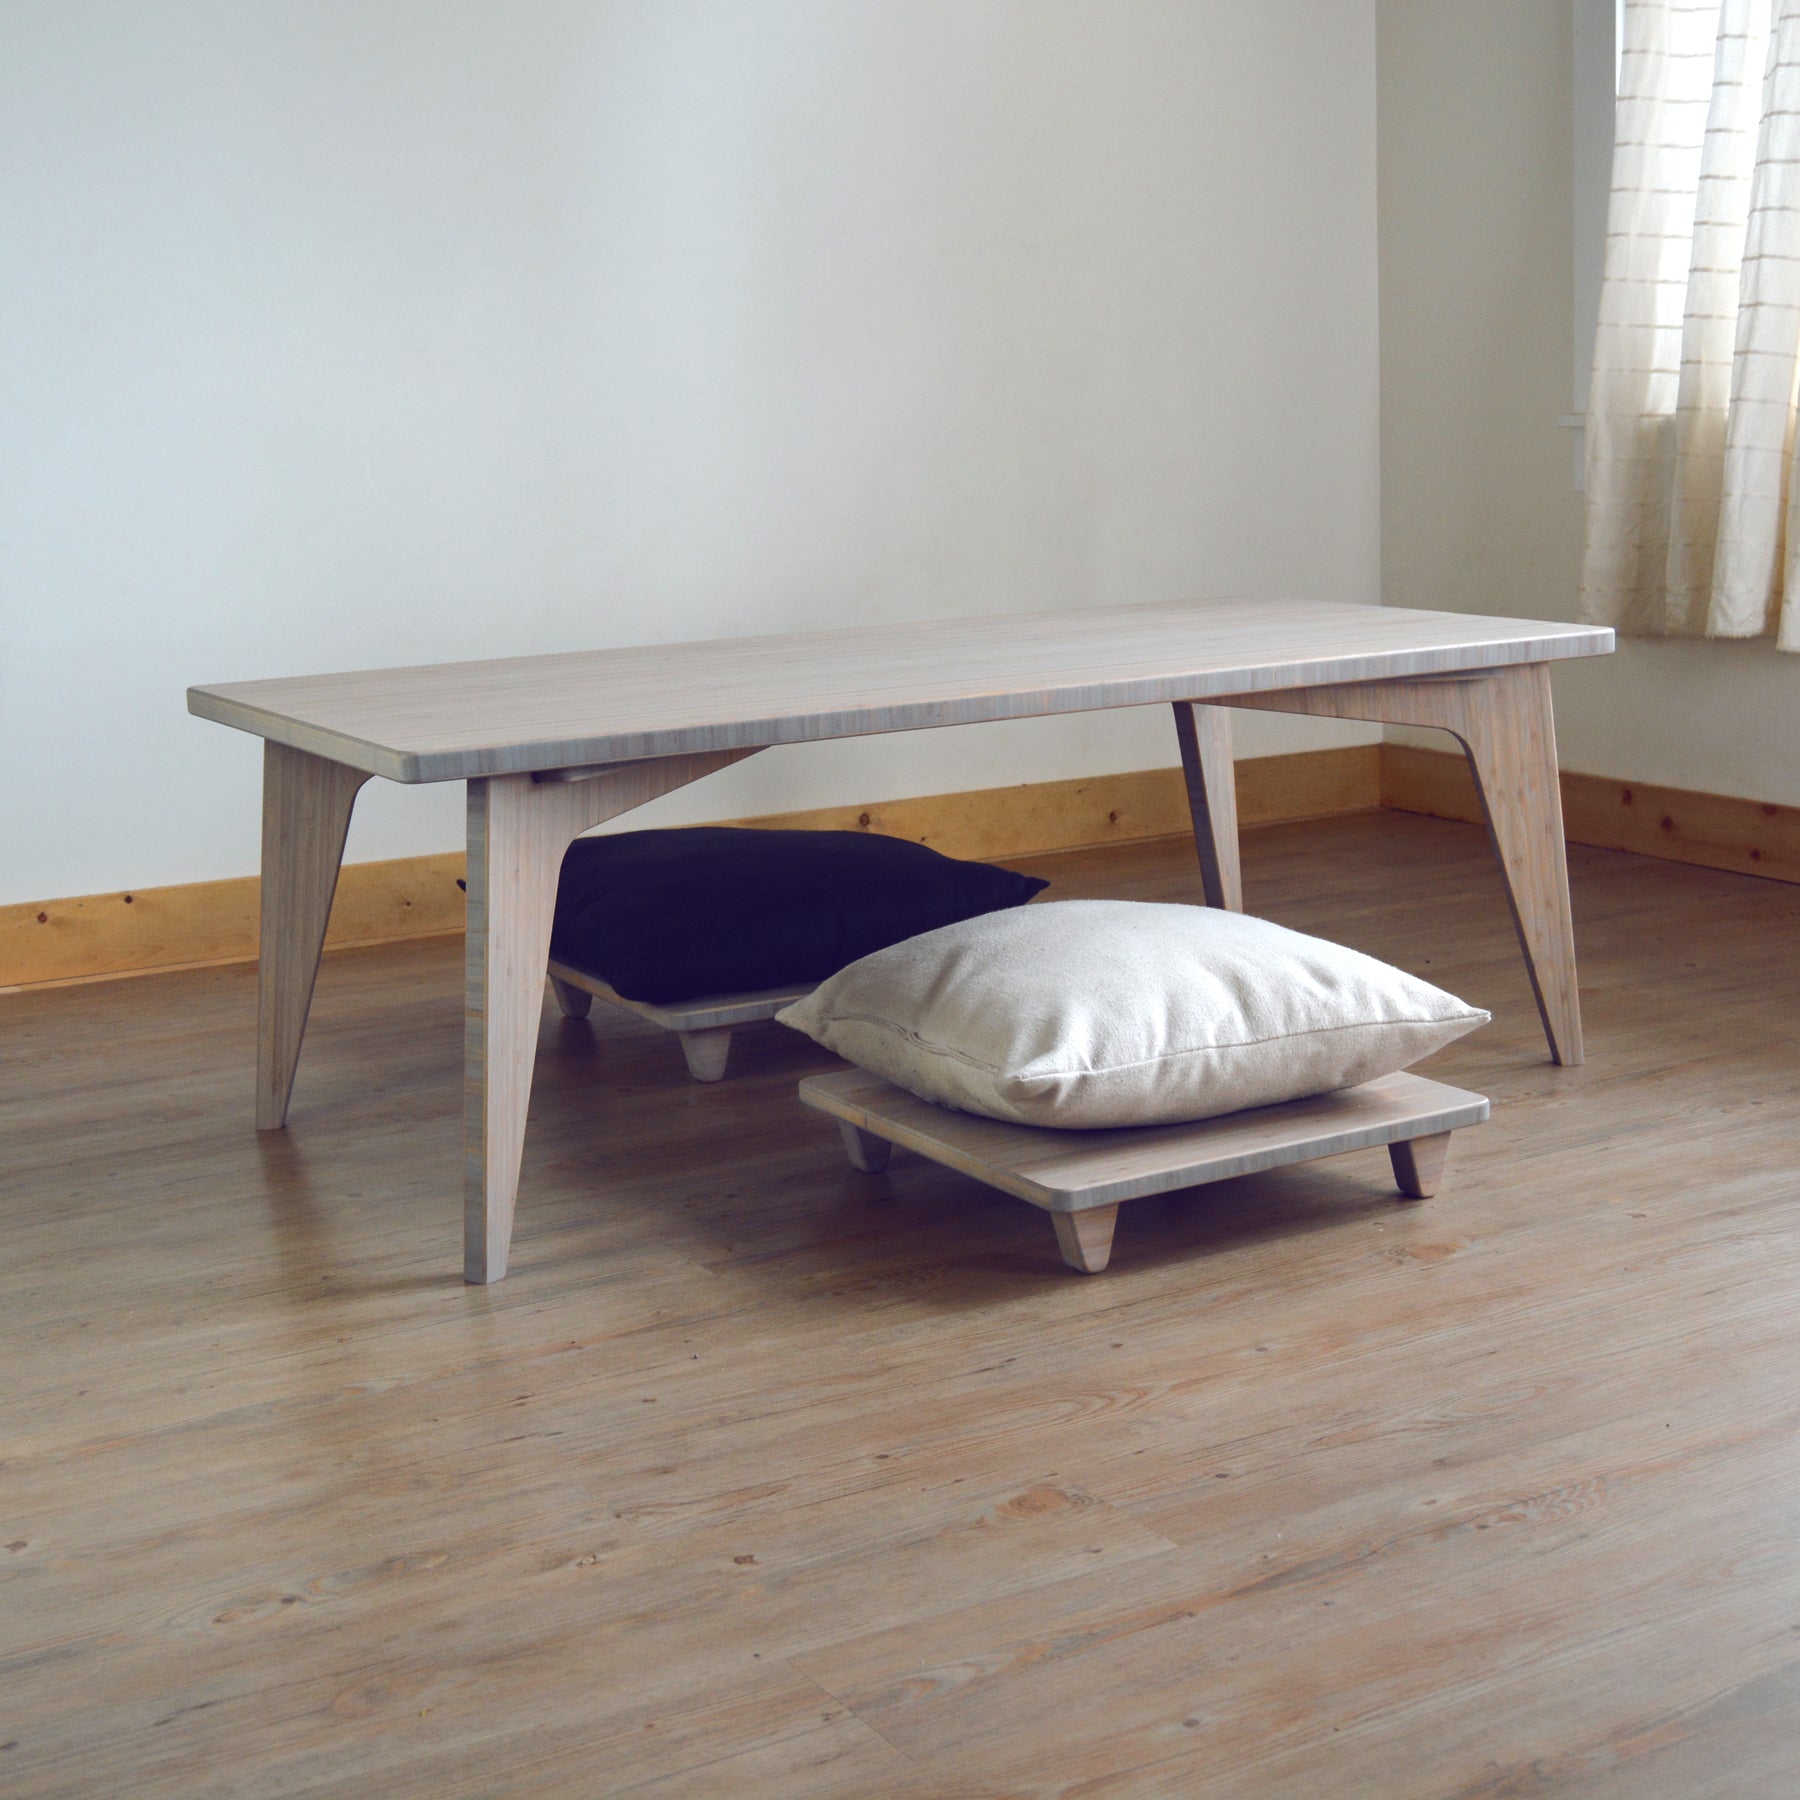 Sustainable grey bamboo table with two pillow lifts. Japanese, mid-century, Scandinavian and contemporary inspired.